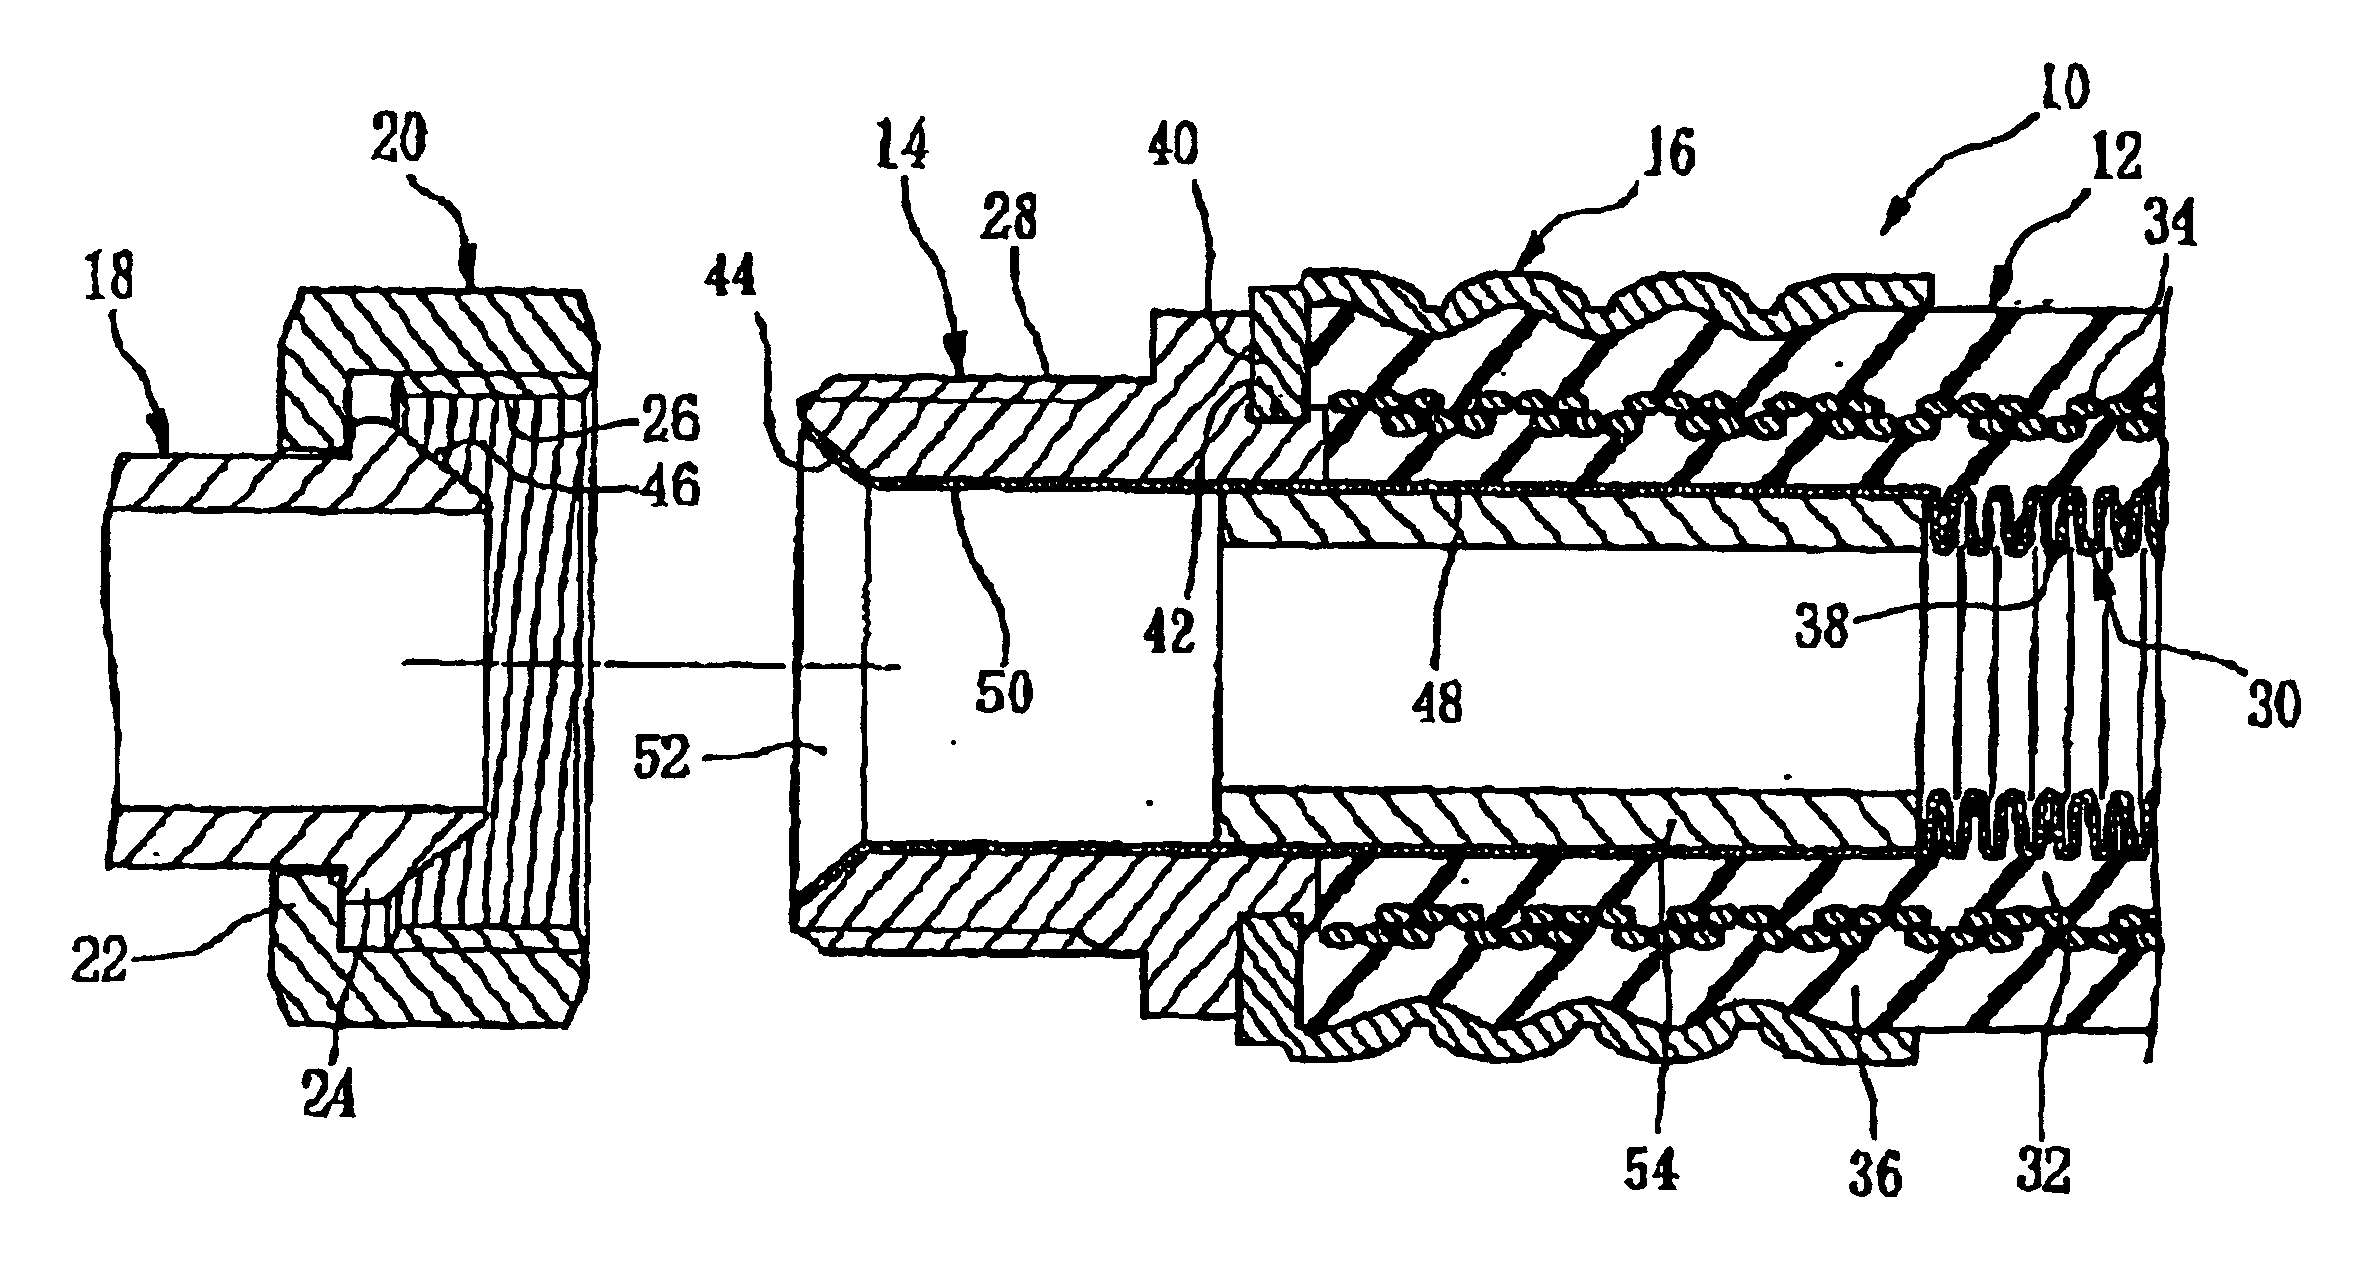 Connecting structure for hose with corrugated metal tube